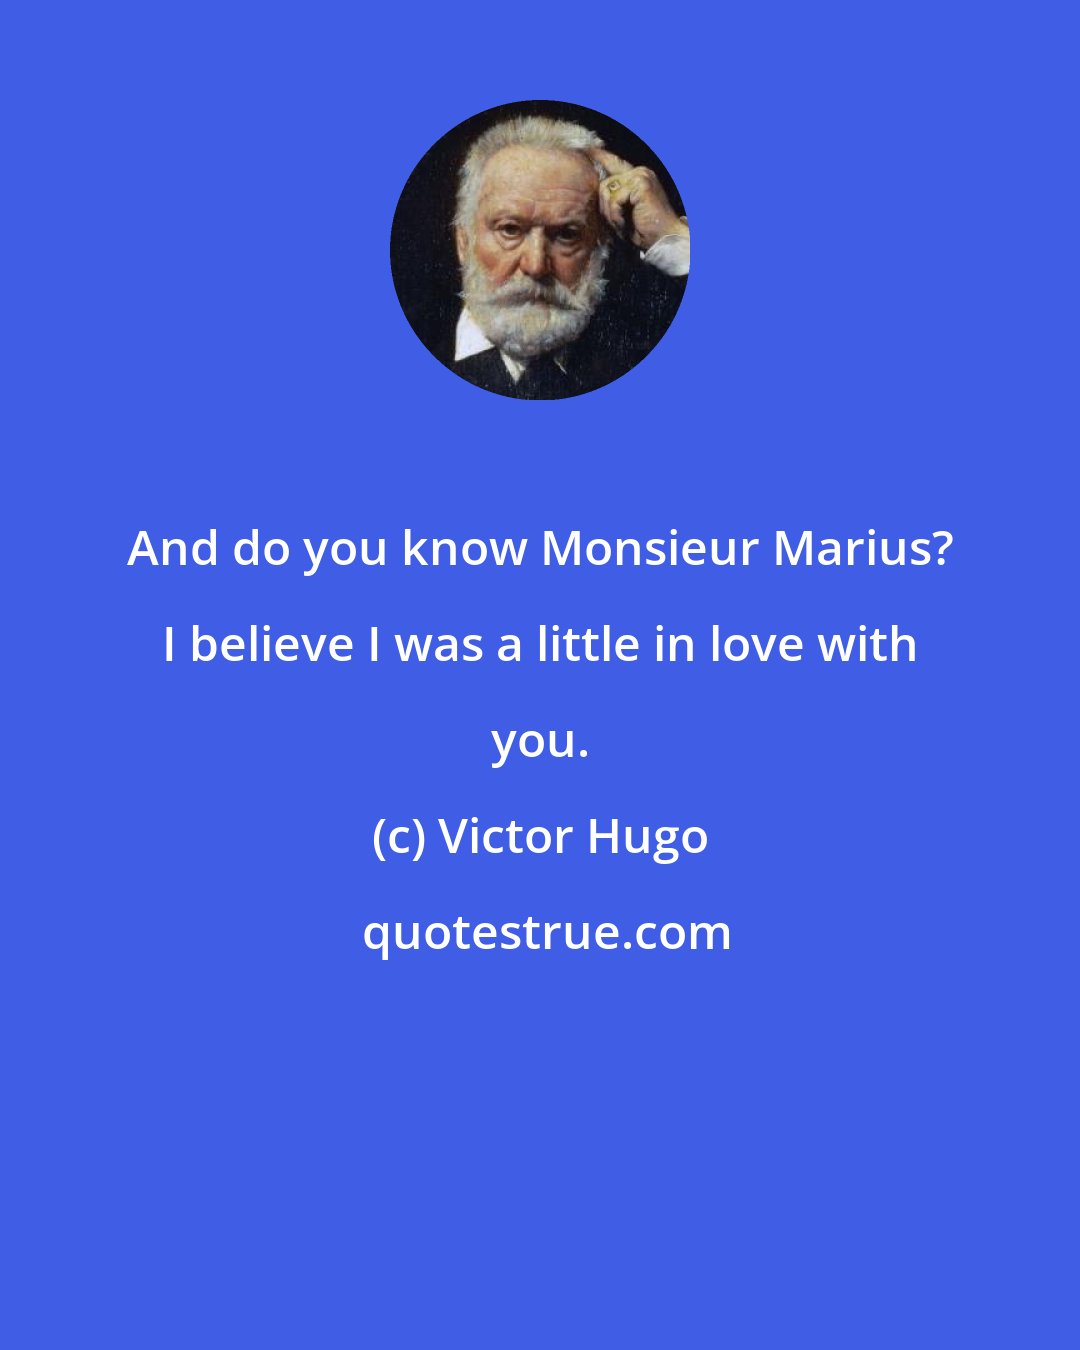 Victor Hugo: And do you know Monsieur Marius? I believe I was a little in love with you.